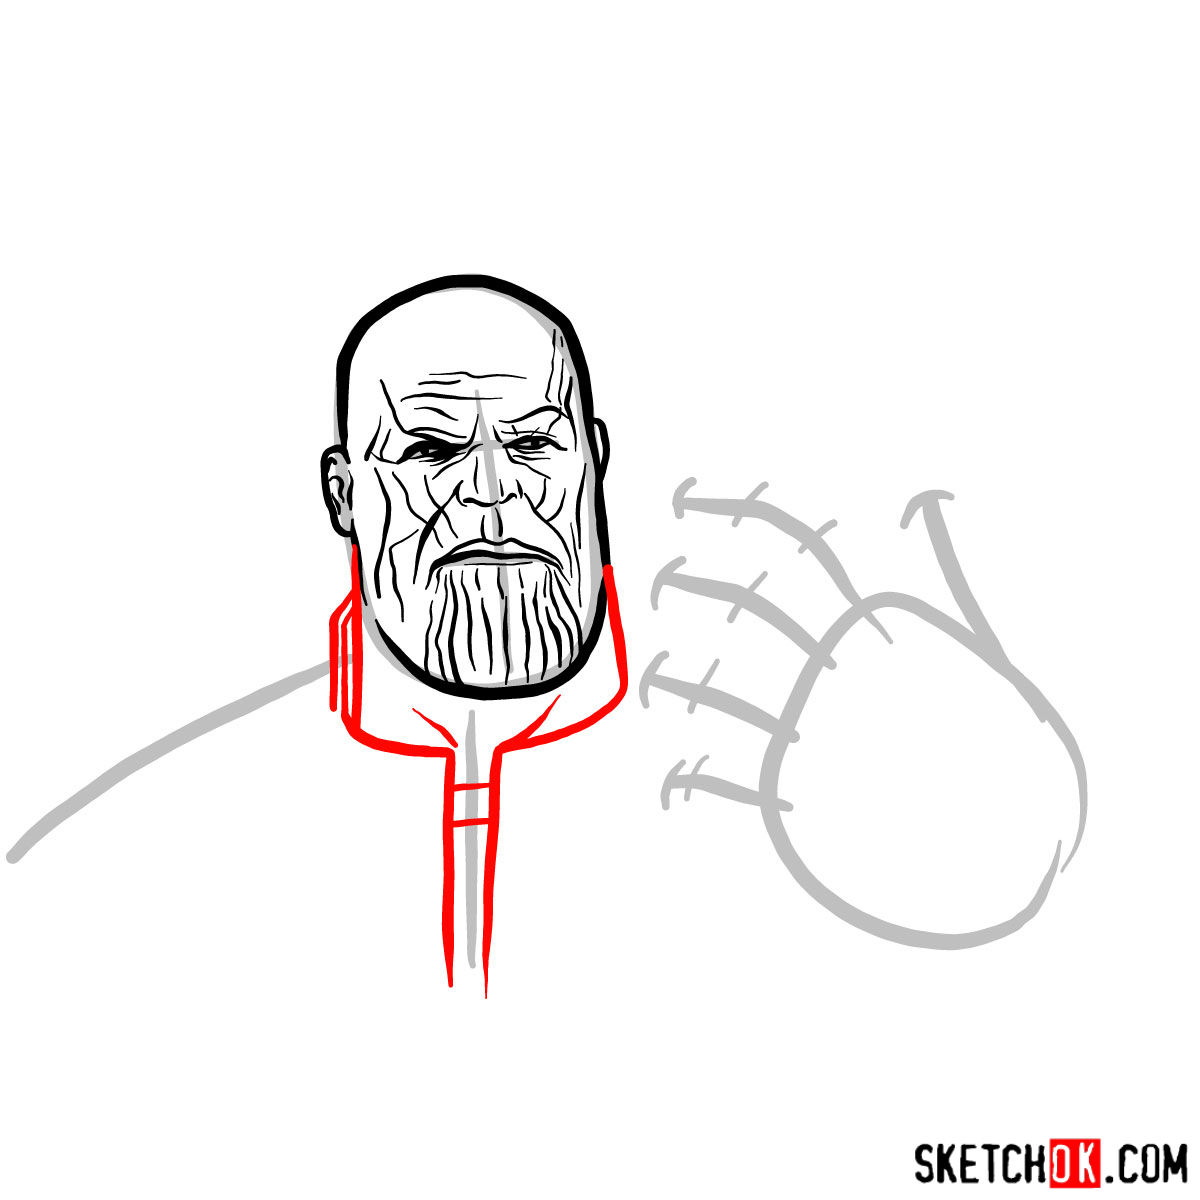 How to draw Thanos from the Avengers: Infinity War 2018 film - step 08